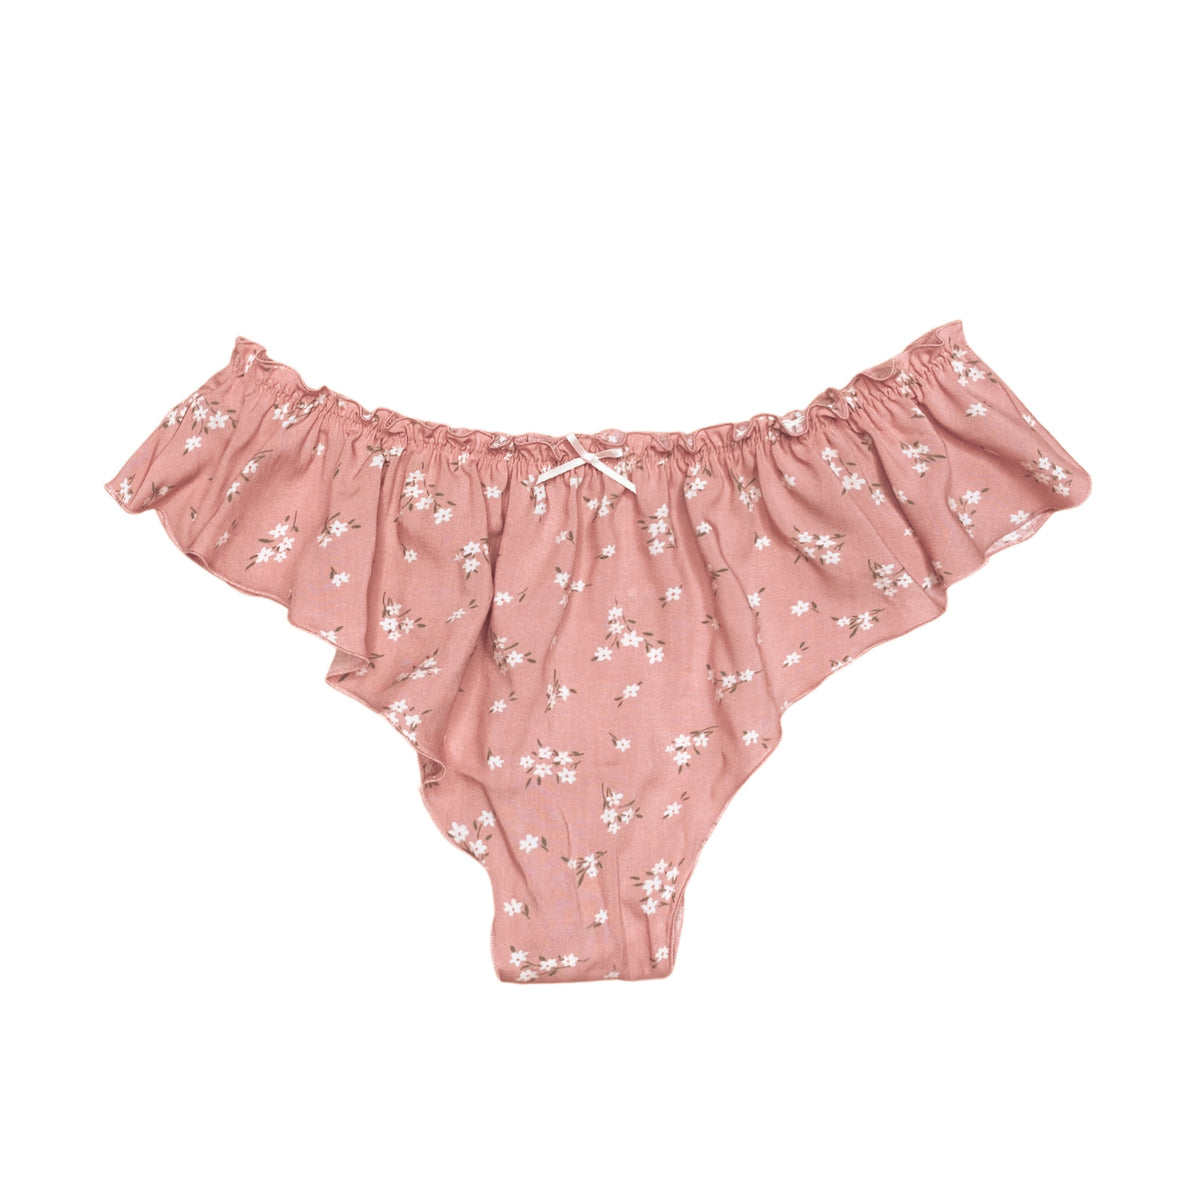 Mini French Knicker - Dusty Floral Rayon